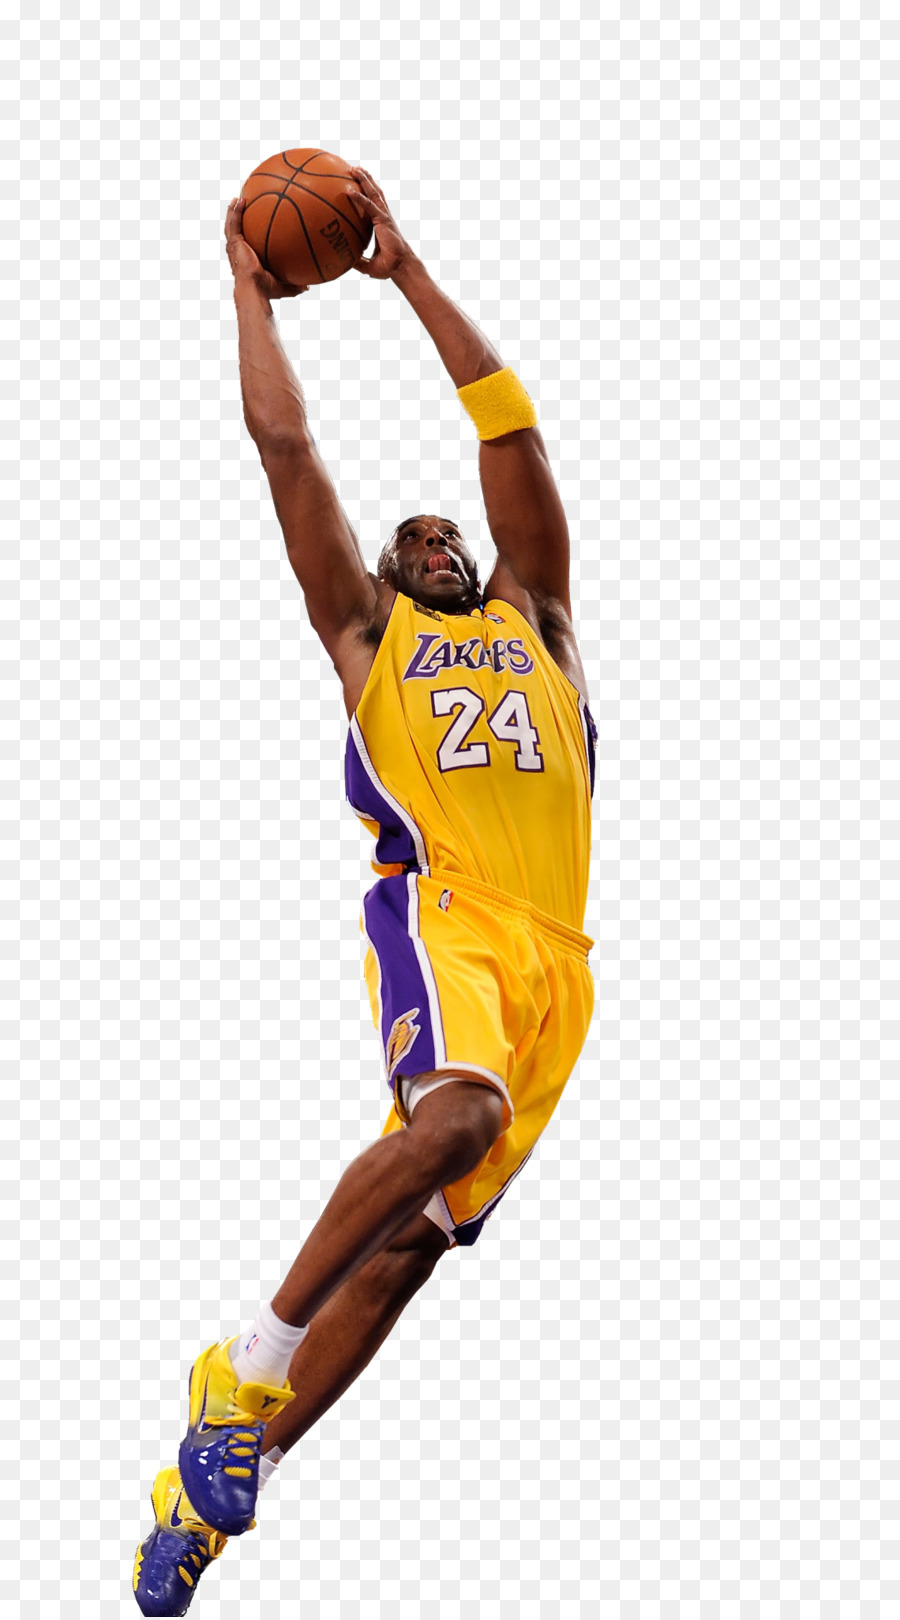 Nike Poster Los Angeles Lakers Just Do It - Kobe Bryant PNG Image png download - 1140*2048 - Free Transparent Nike png Download.